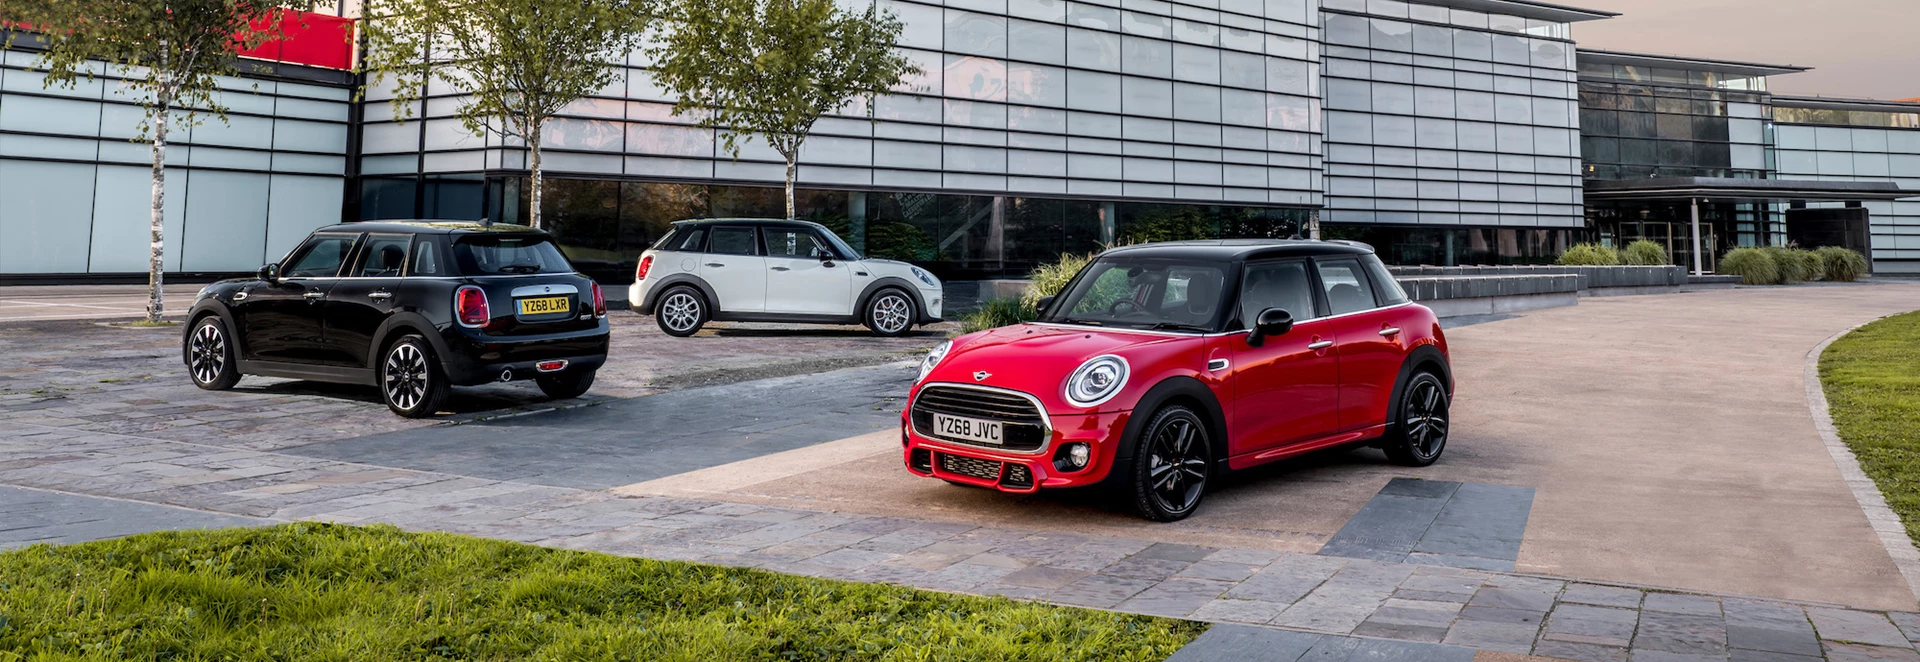 All you need to know about MINI's new simplified range